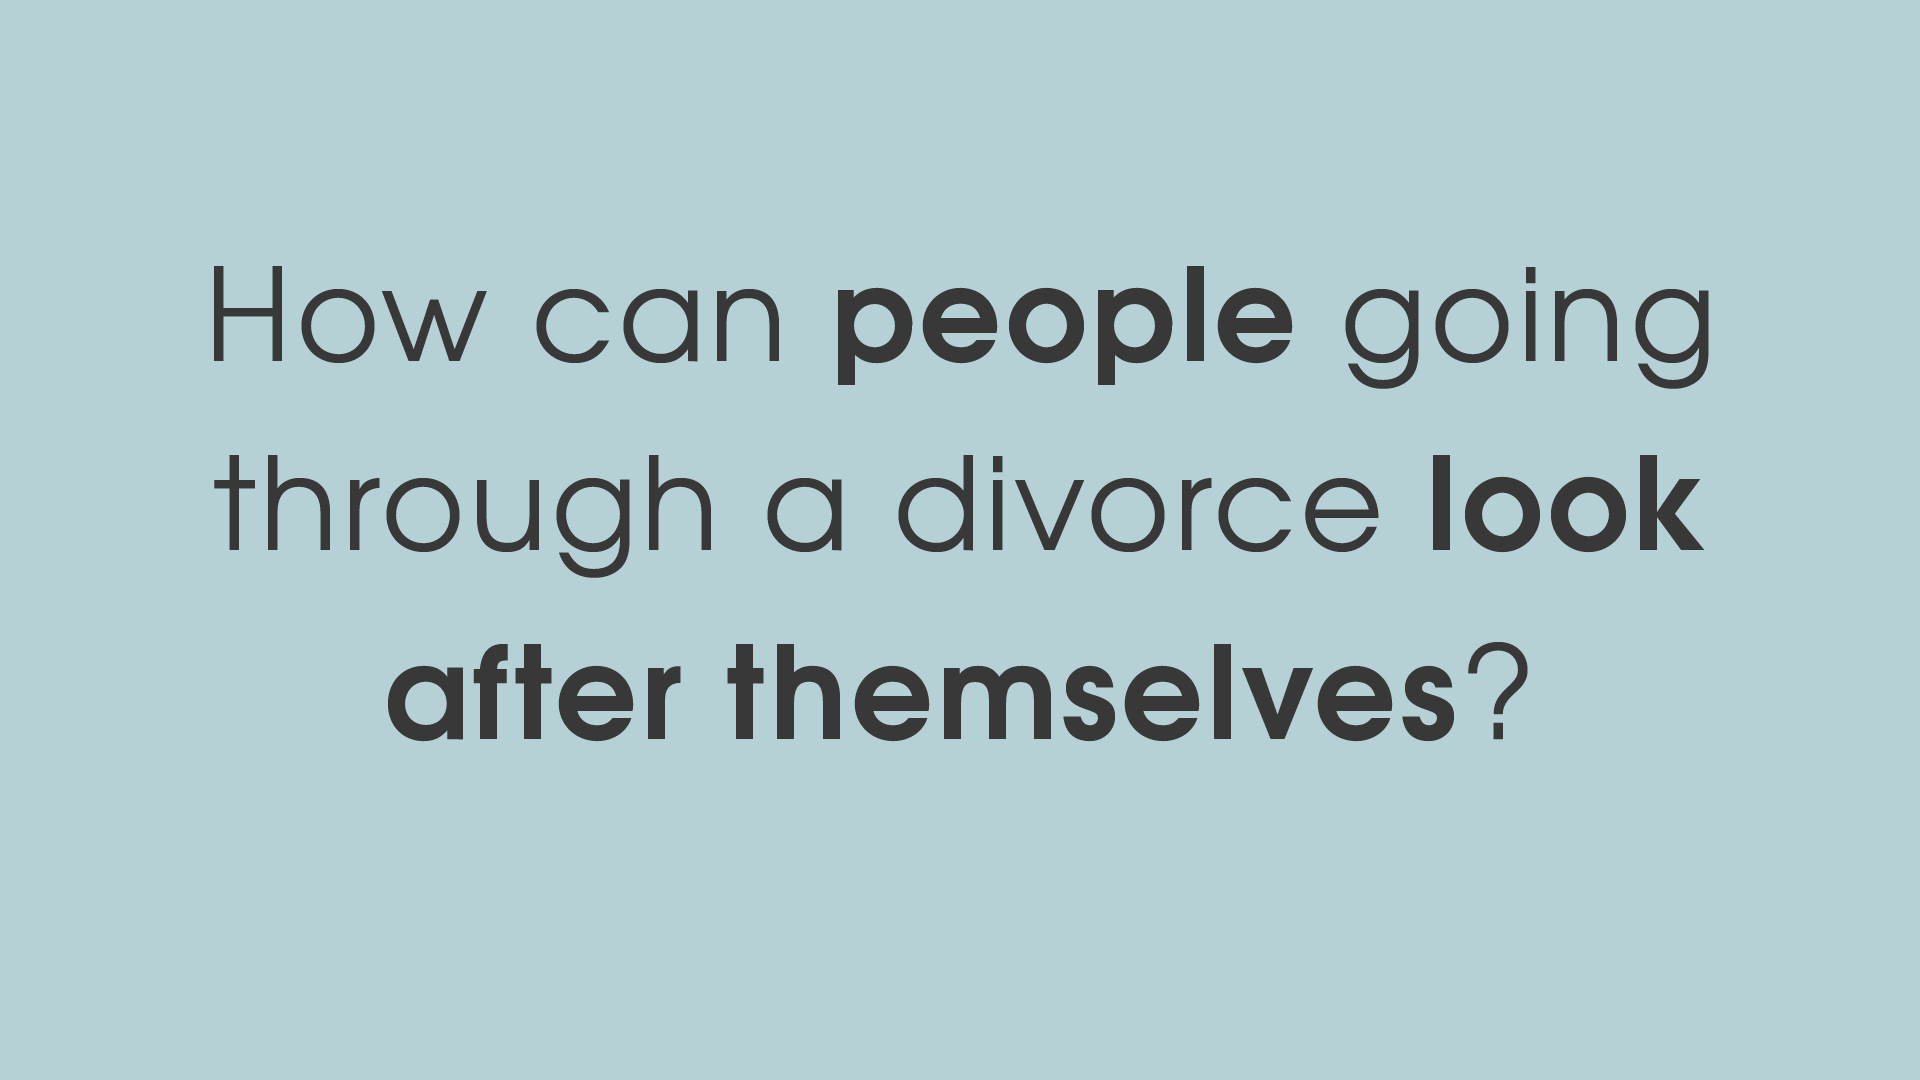 Family lawyer article video - How can people going through a divorce look after themselves?